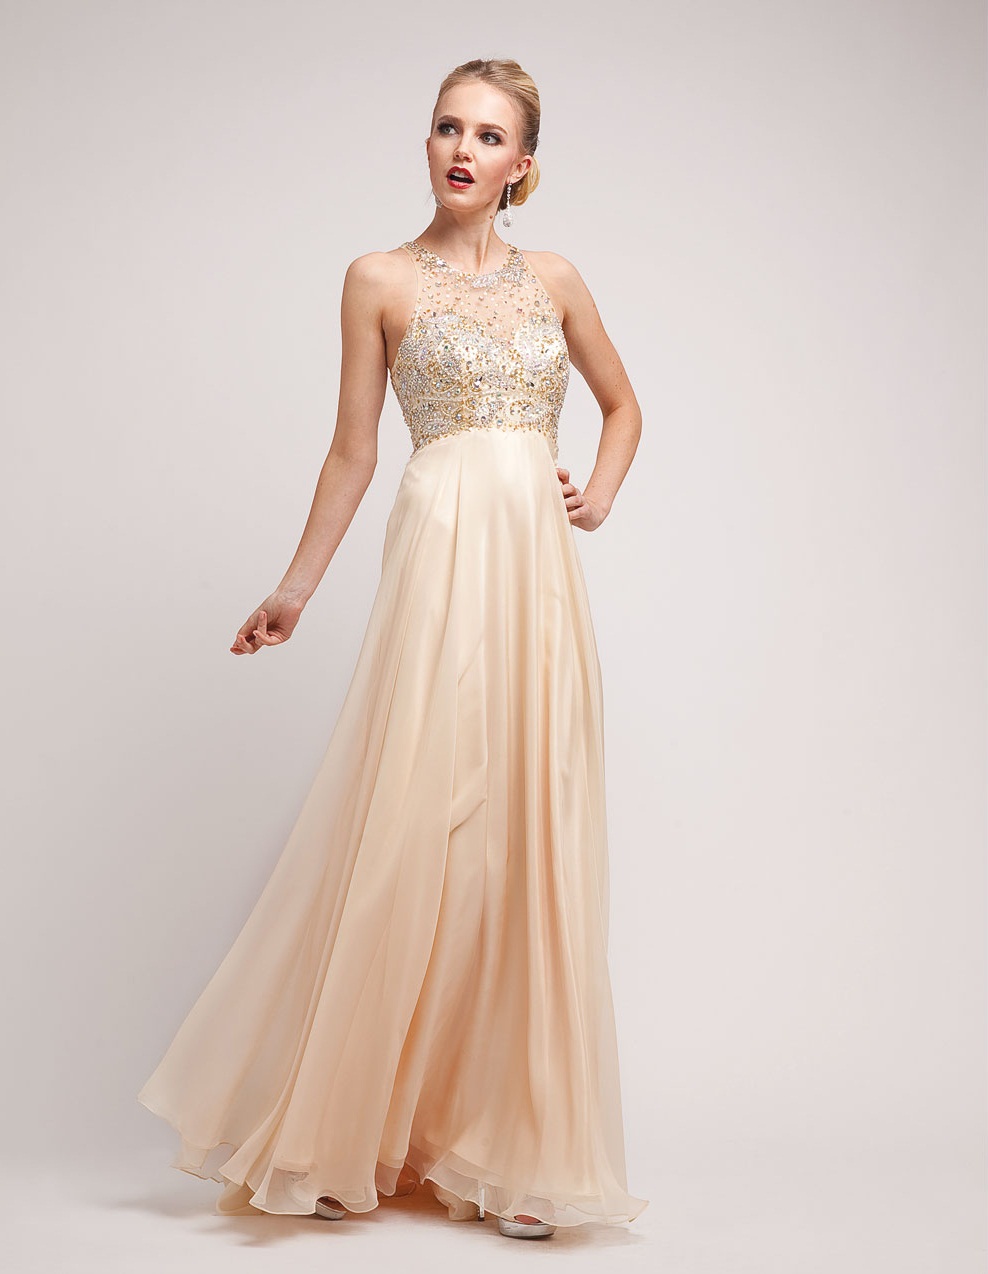 Champagne Prom Dresses | Dressed Up Girl